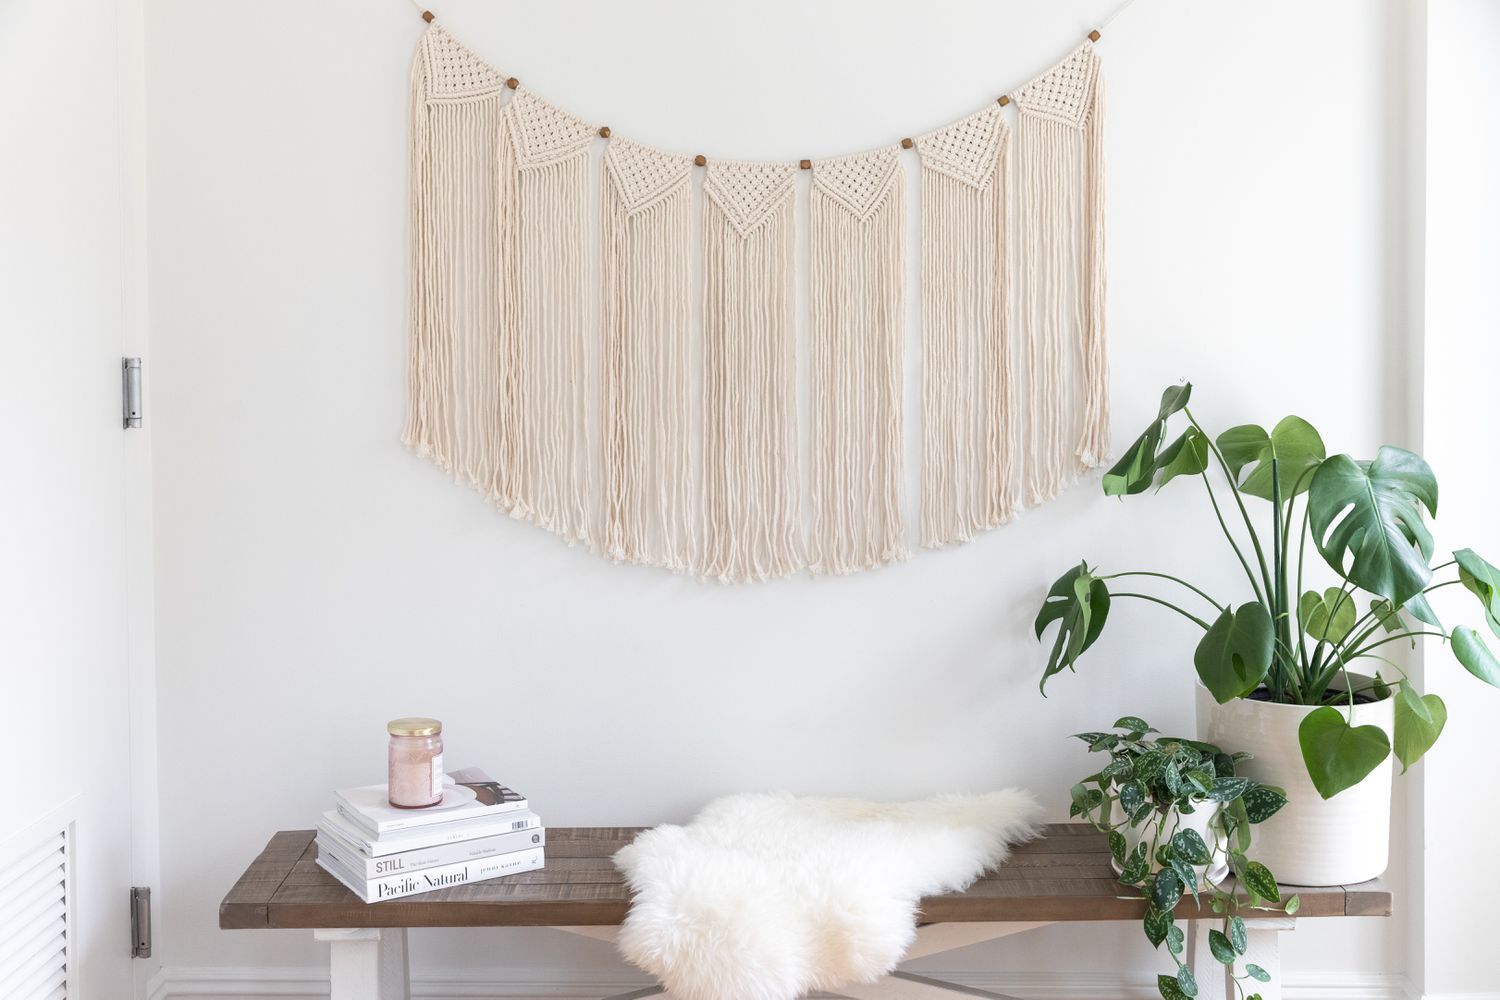 10 Ideas For Using Macrame As Home Decor Within Latest Wall Hanging Decorations (Gallery 9 of 20)